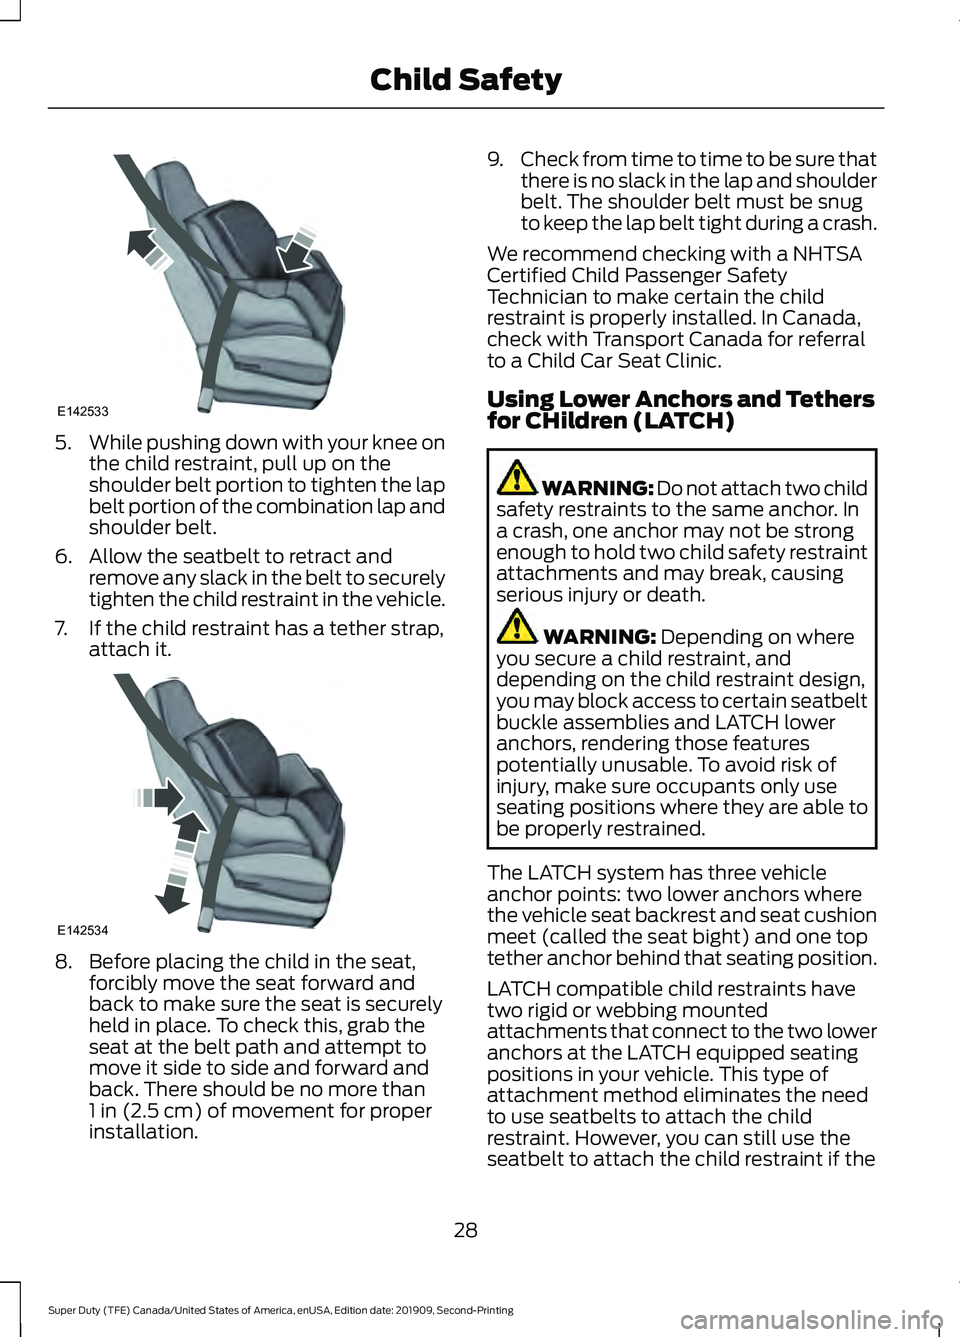 FORD F450 SUPER DUTY 2020  Owners Manual 5.
While pushing down with your knee on
the child restraint, pull up on the
shoulder belt portion to tighten the lap
belt portion of the combination lap and
shoulder belt.
6. Allow the seatbelt to ret